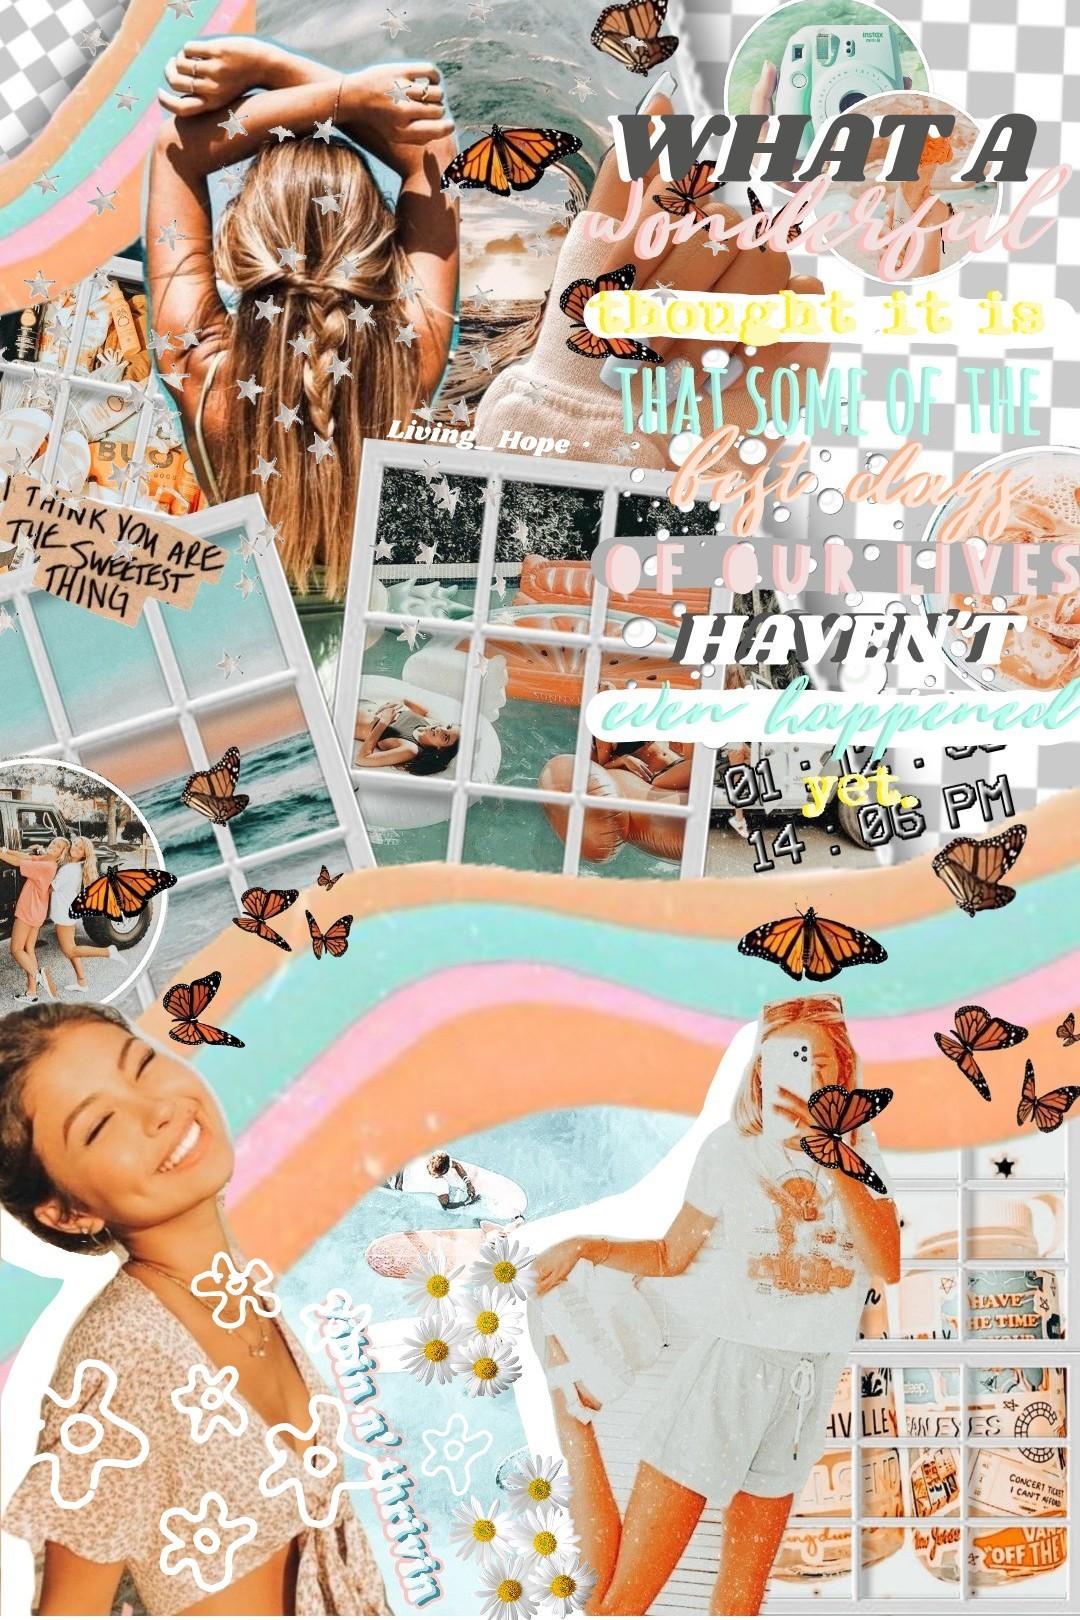 🌼6•7•21🌼
So sorry for this premade collage. 🙄 I kinda like this tho lol I haven't done a peachy collage in a while. Bible verse of the day "God does powerful things" James 5:16 ✞ Qotd: Favorite song from Sour? Aotd: Good 4 u but I LOVE them all!! 